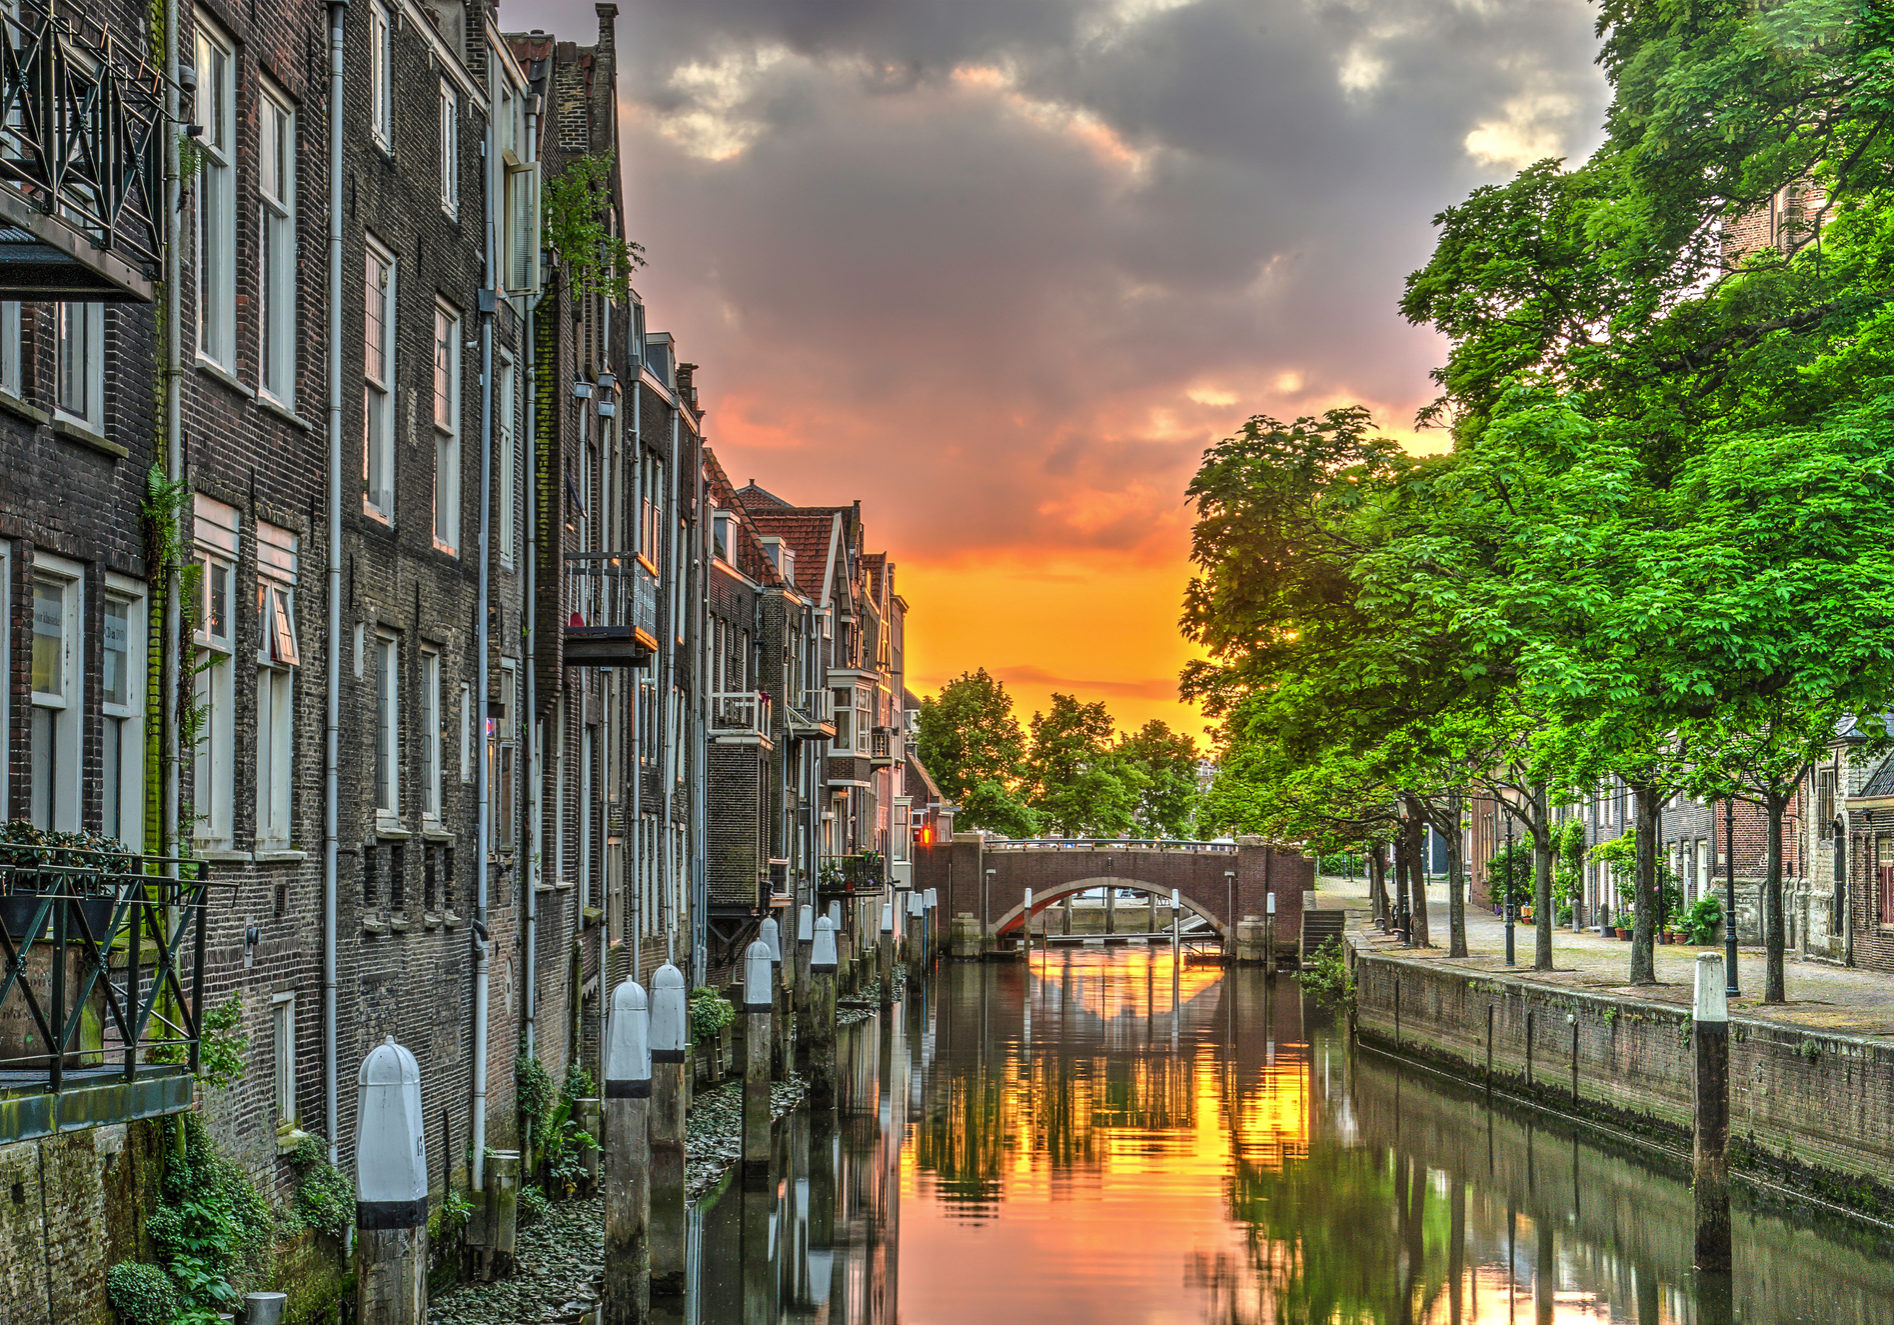 Fiery sunset reflecting in a canal lined with houses in the medieval town centre of Dordrecht, the Netherlands